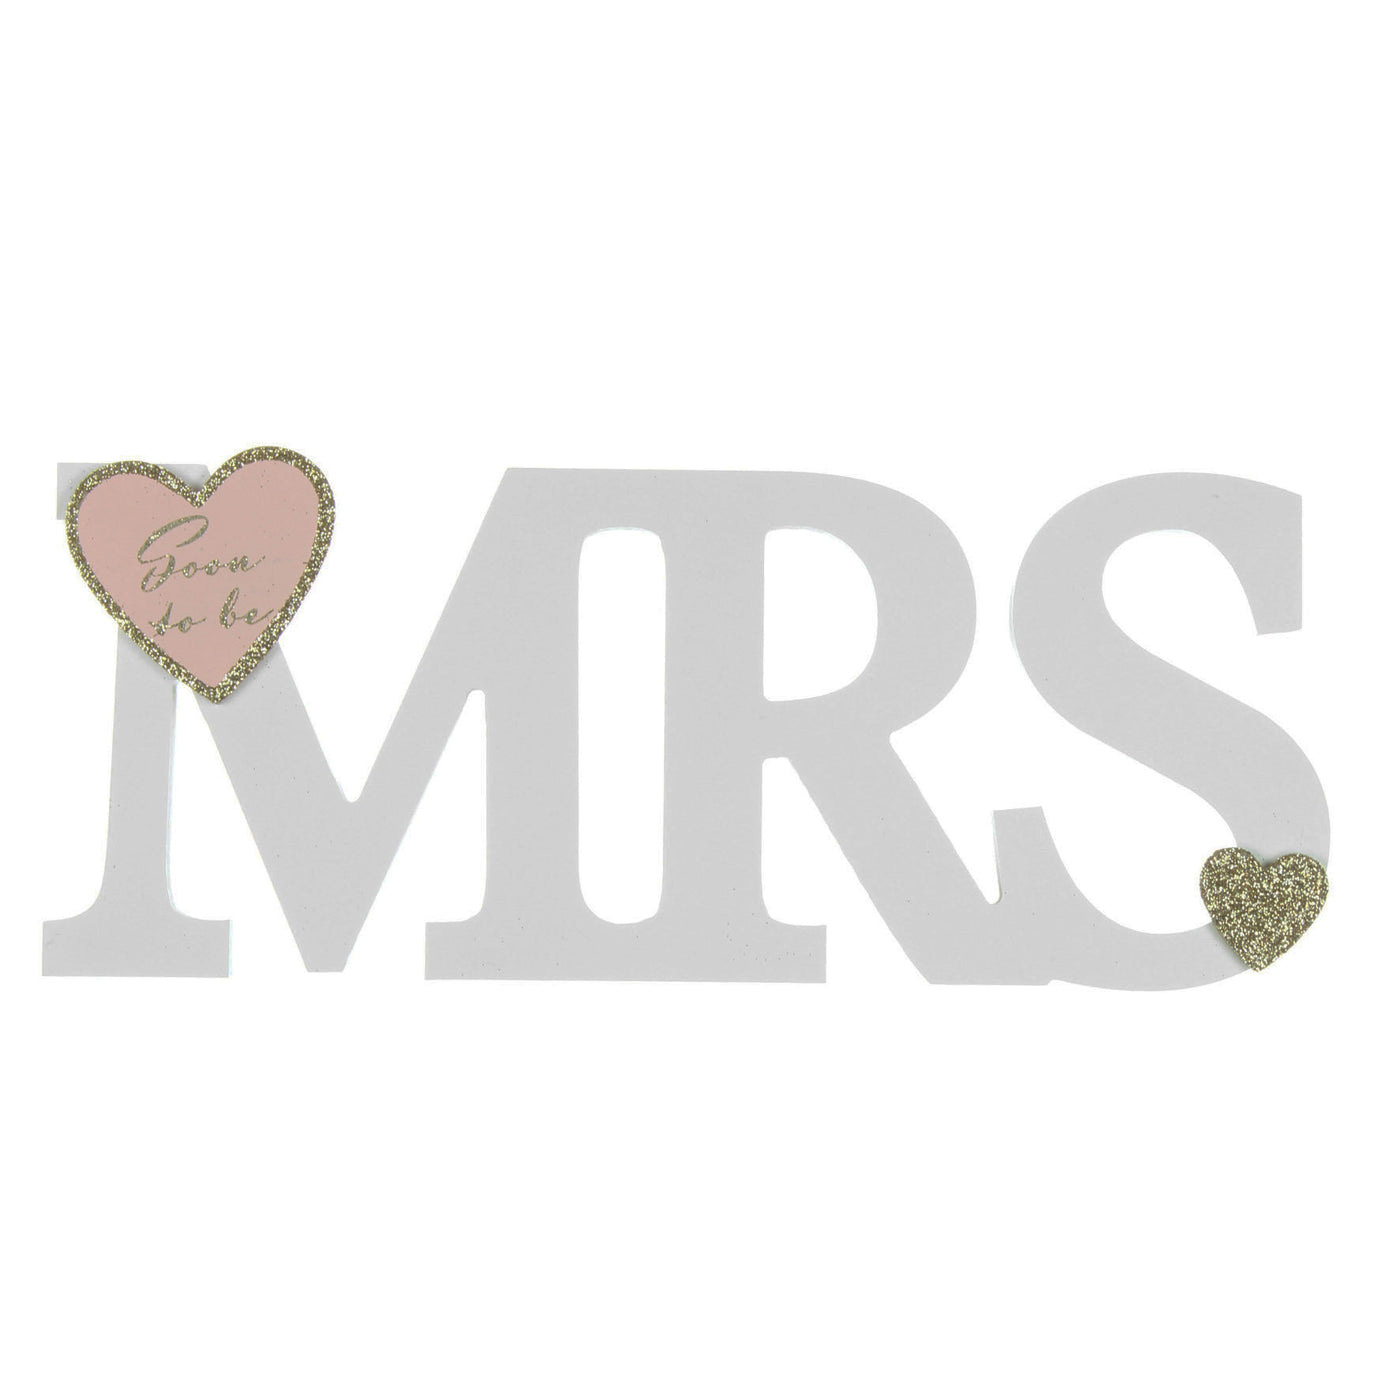 'Soon To Be Mrs' Sign